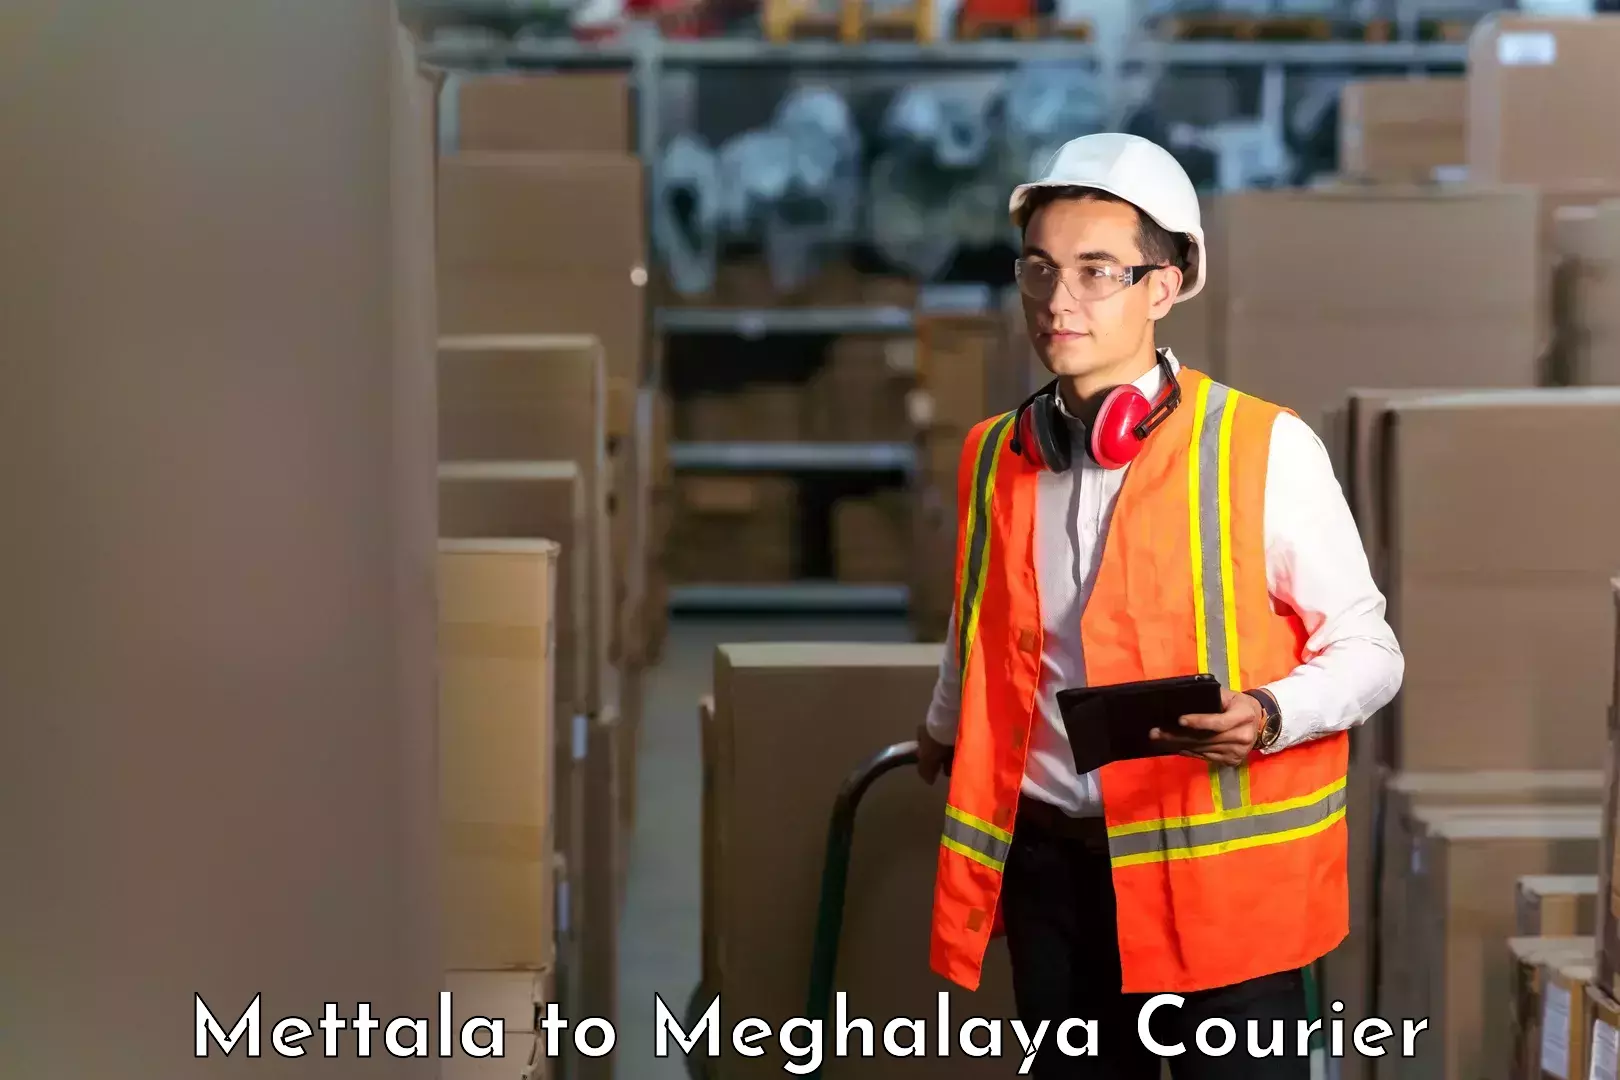 Nationwide courier service Mettala to Meghalaya